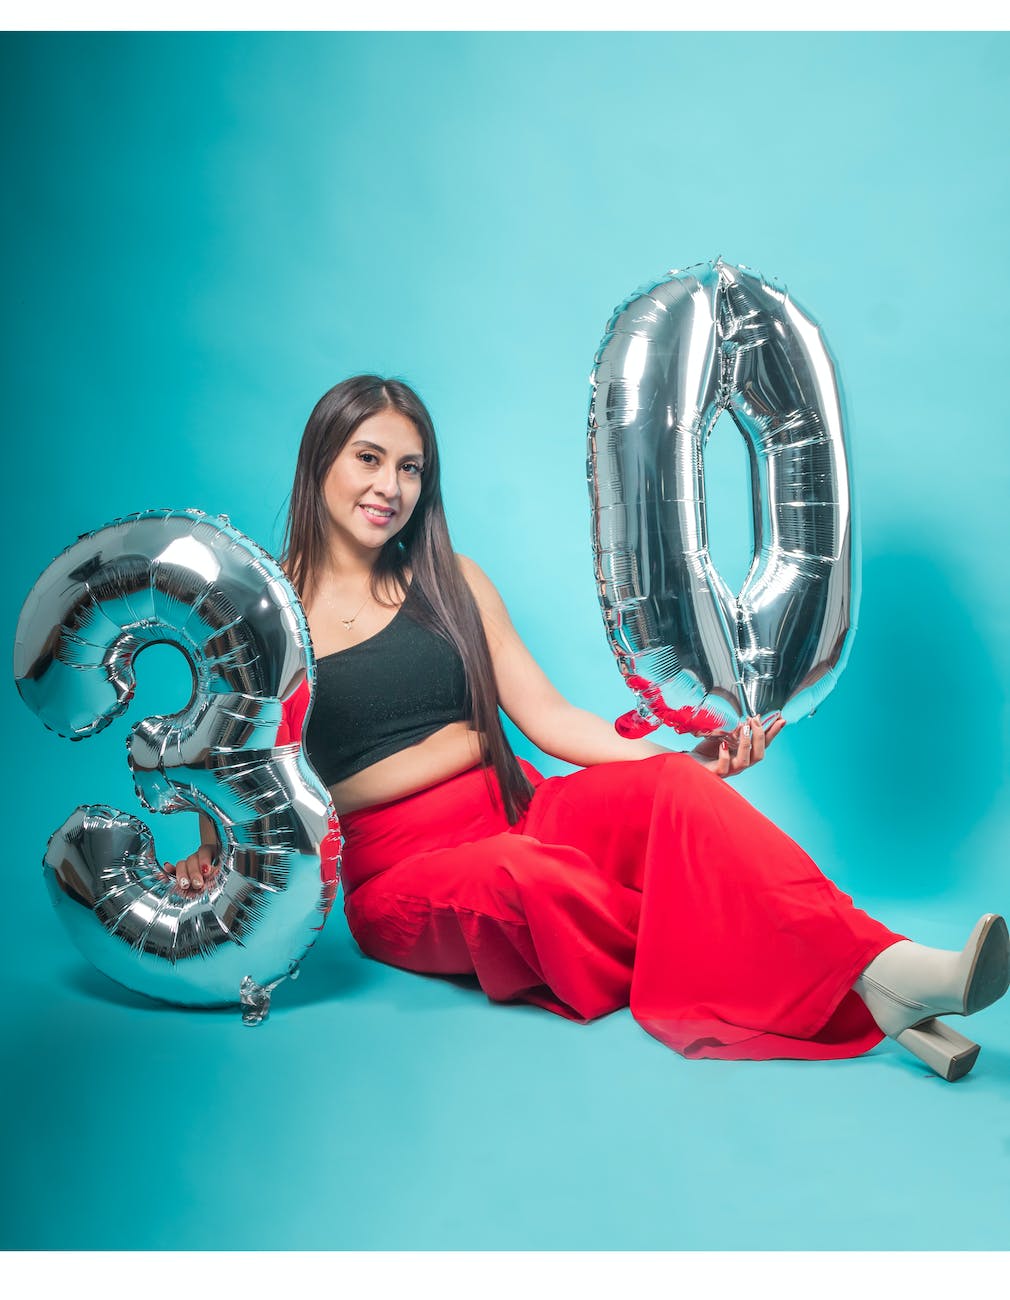 smiling woman sitting and posing with birthday balloons